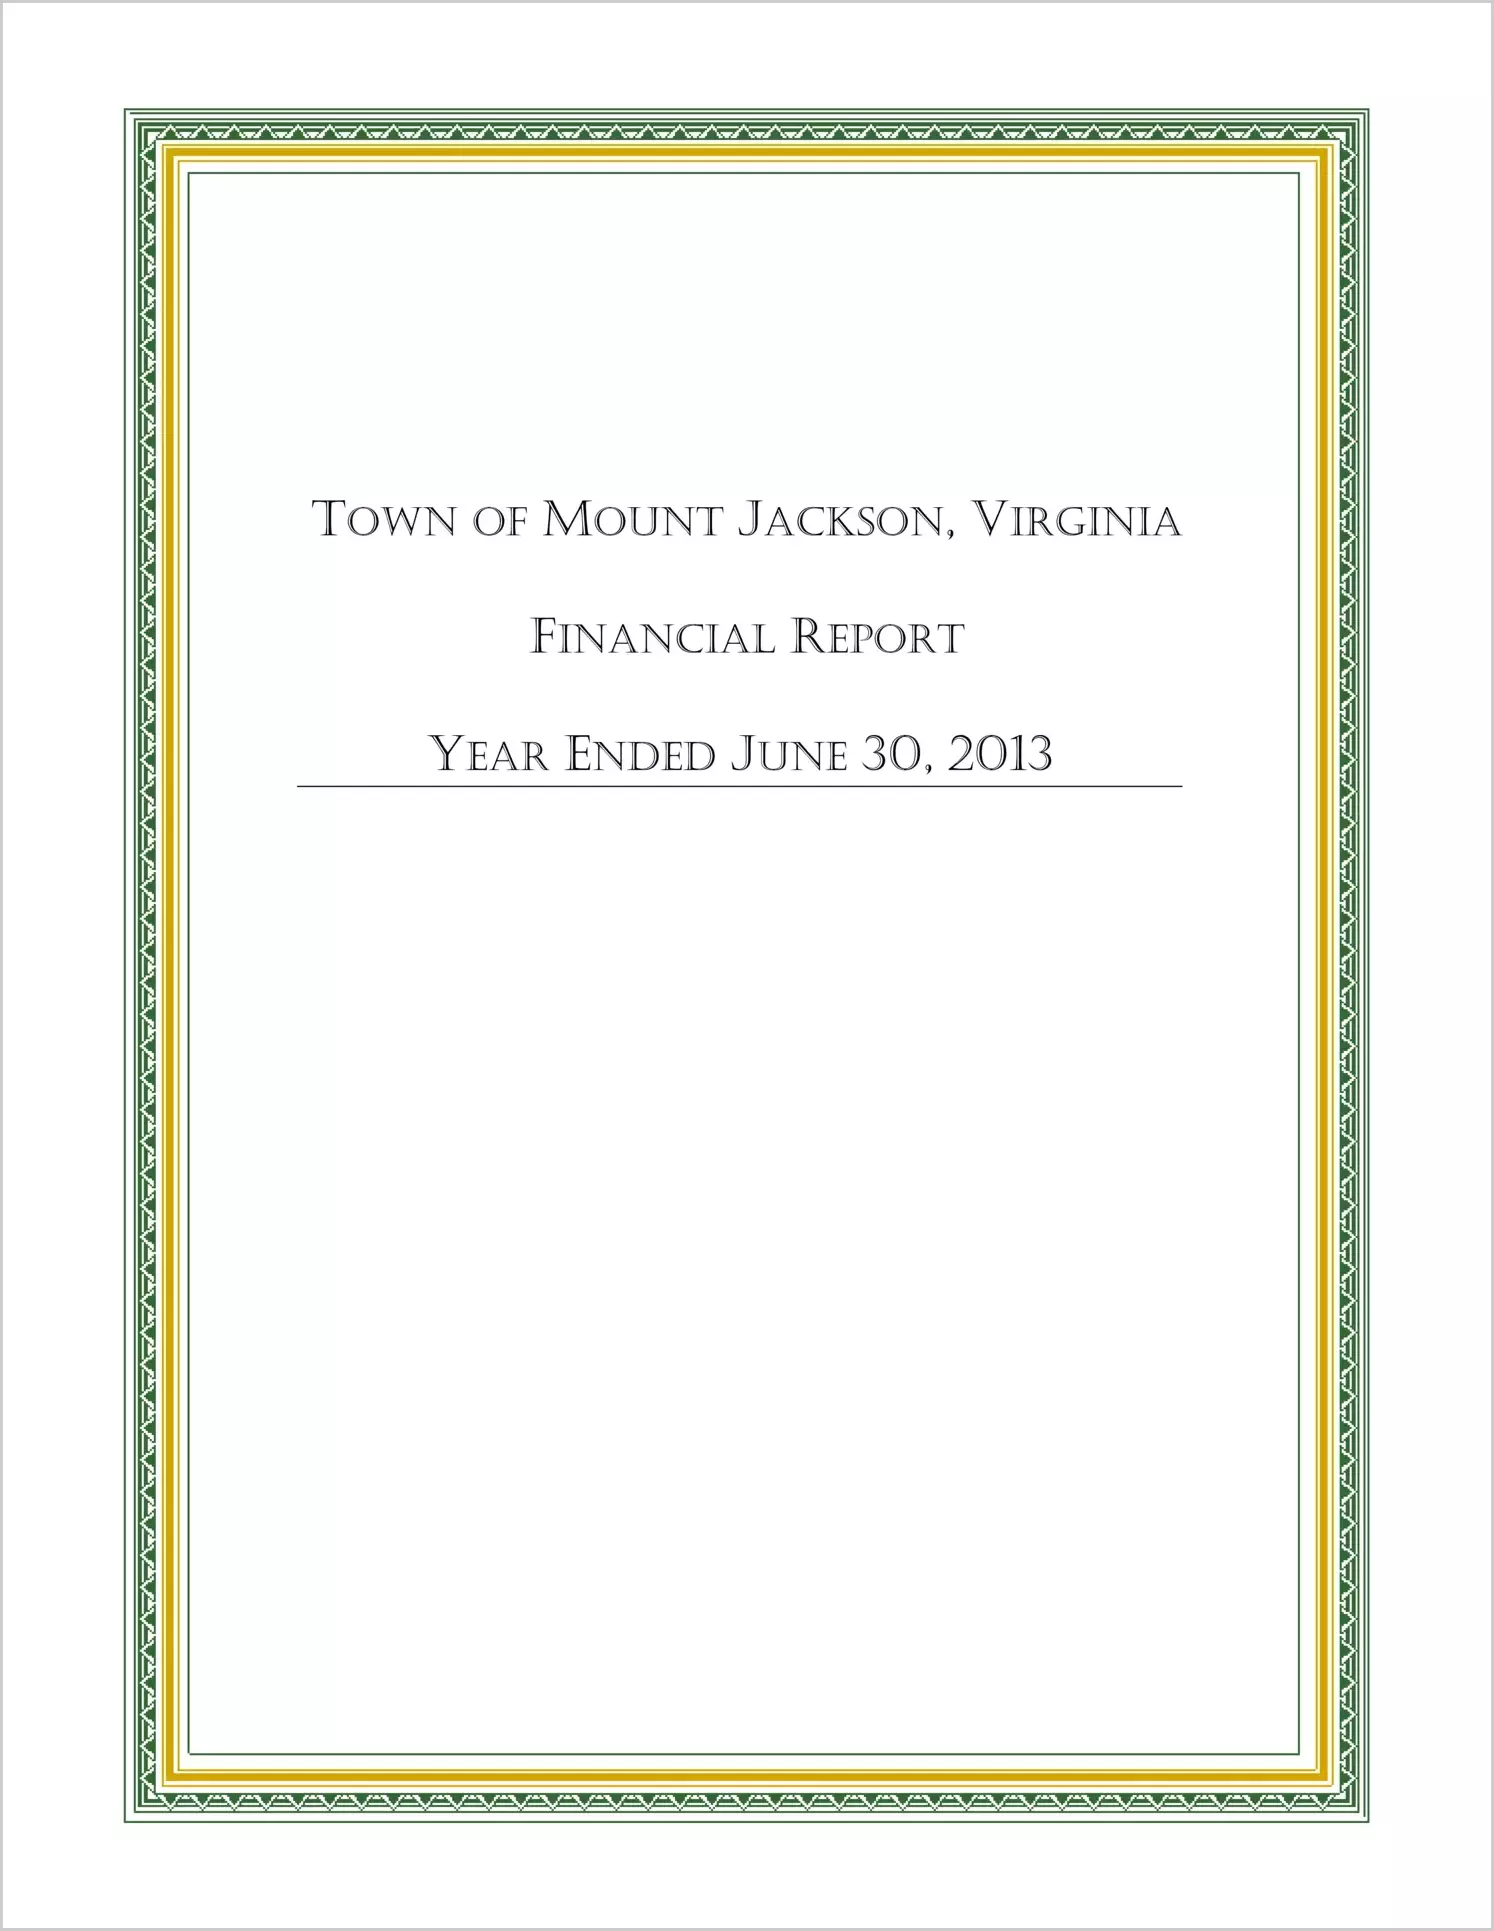 2013 Annual Financial Report for Town of Mount Jackson